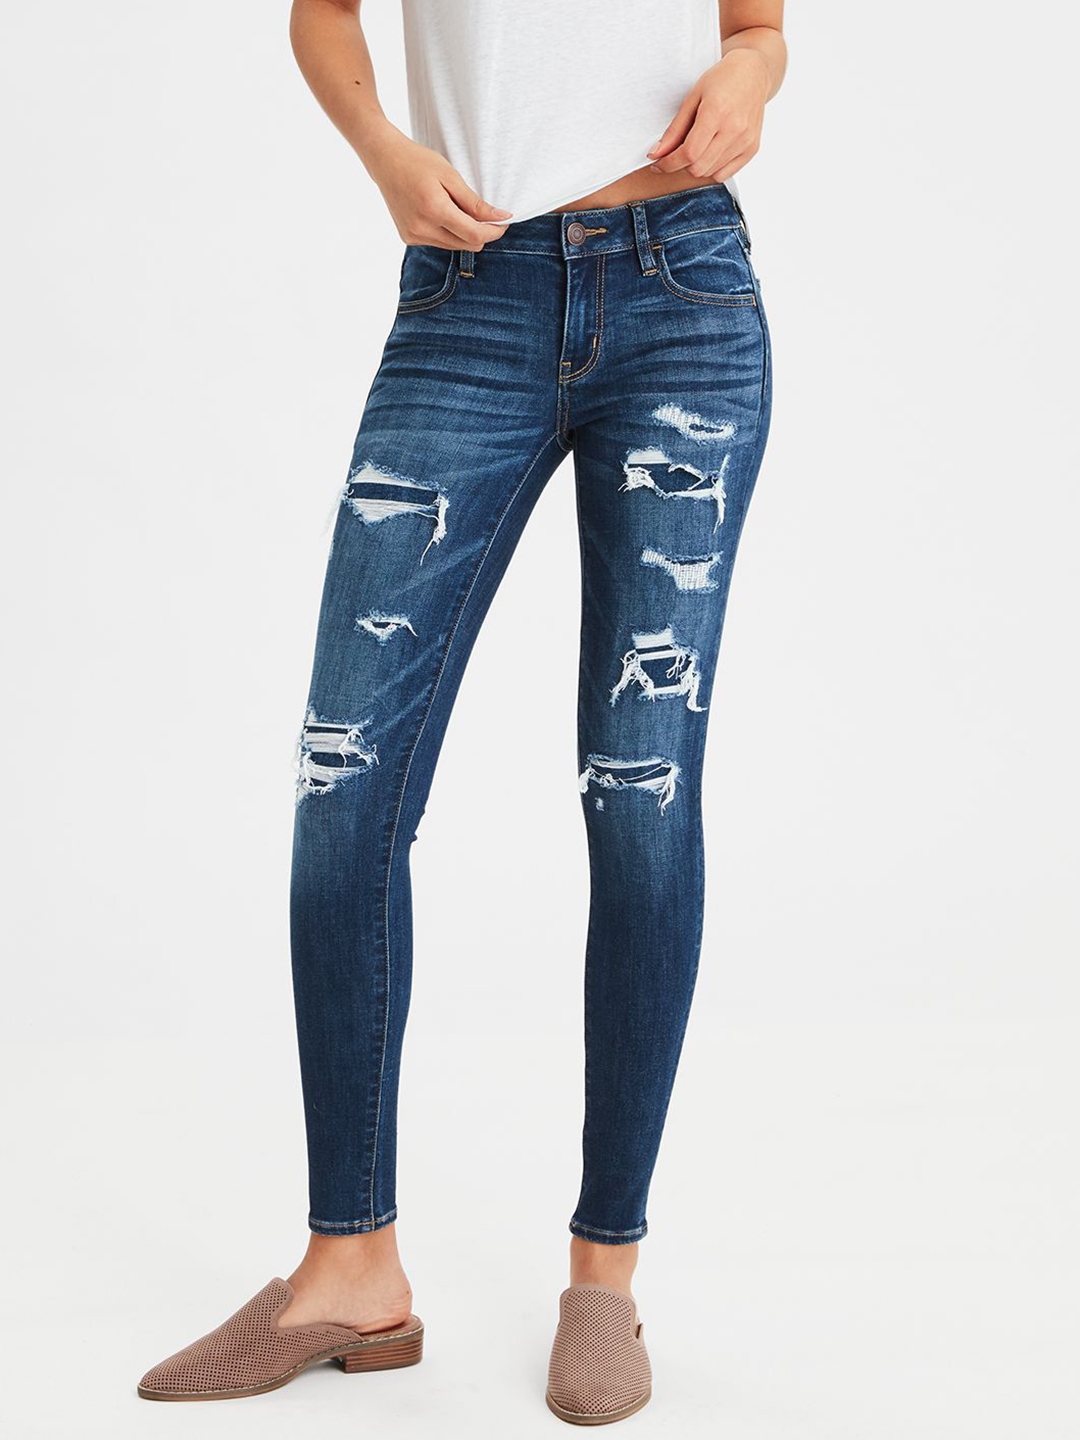 american eagle low rise jegging